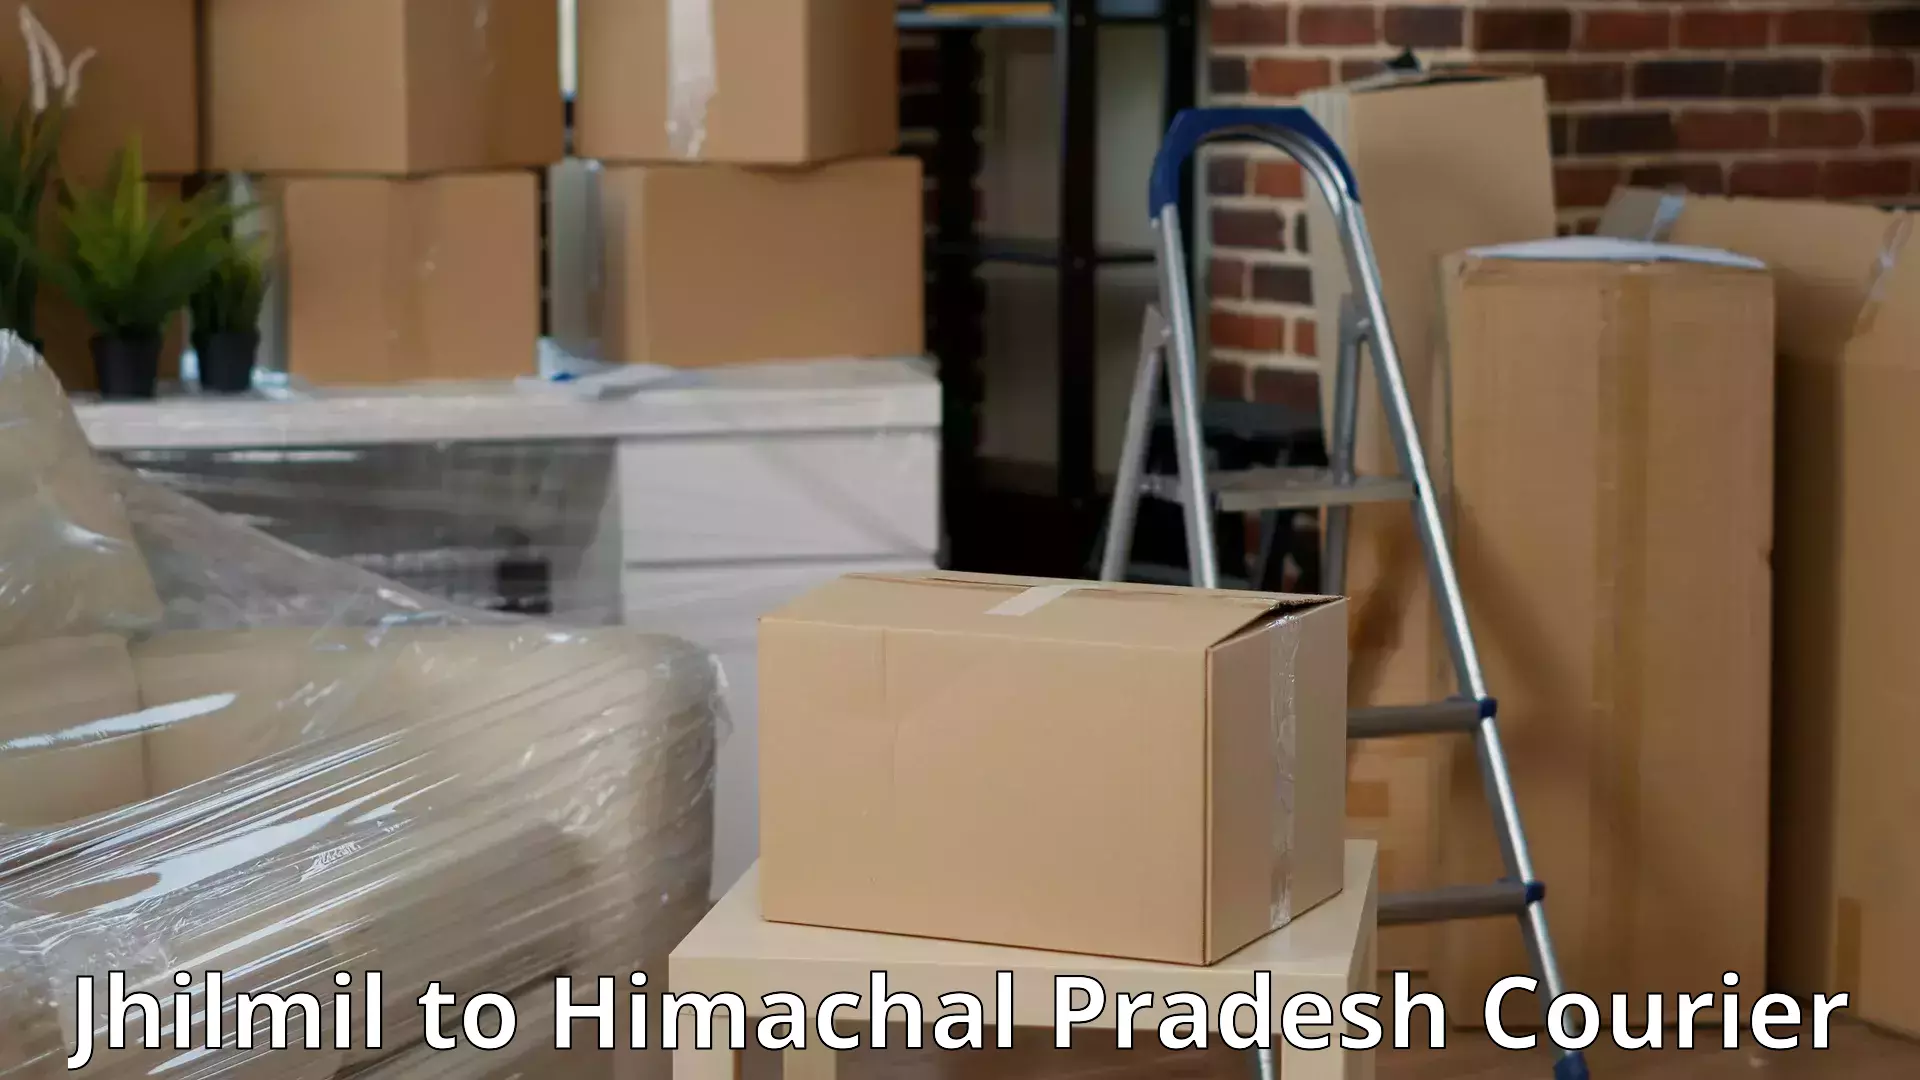 Trusted moving company Jhilmil to Himachal Pradesh